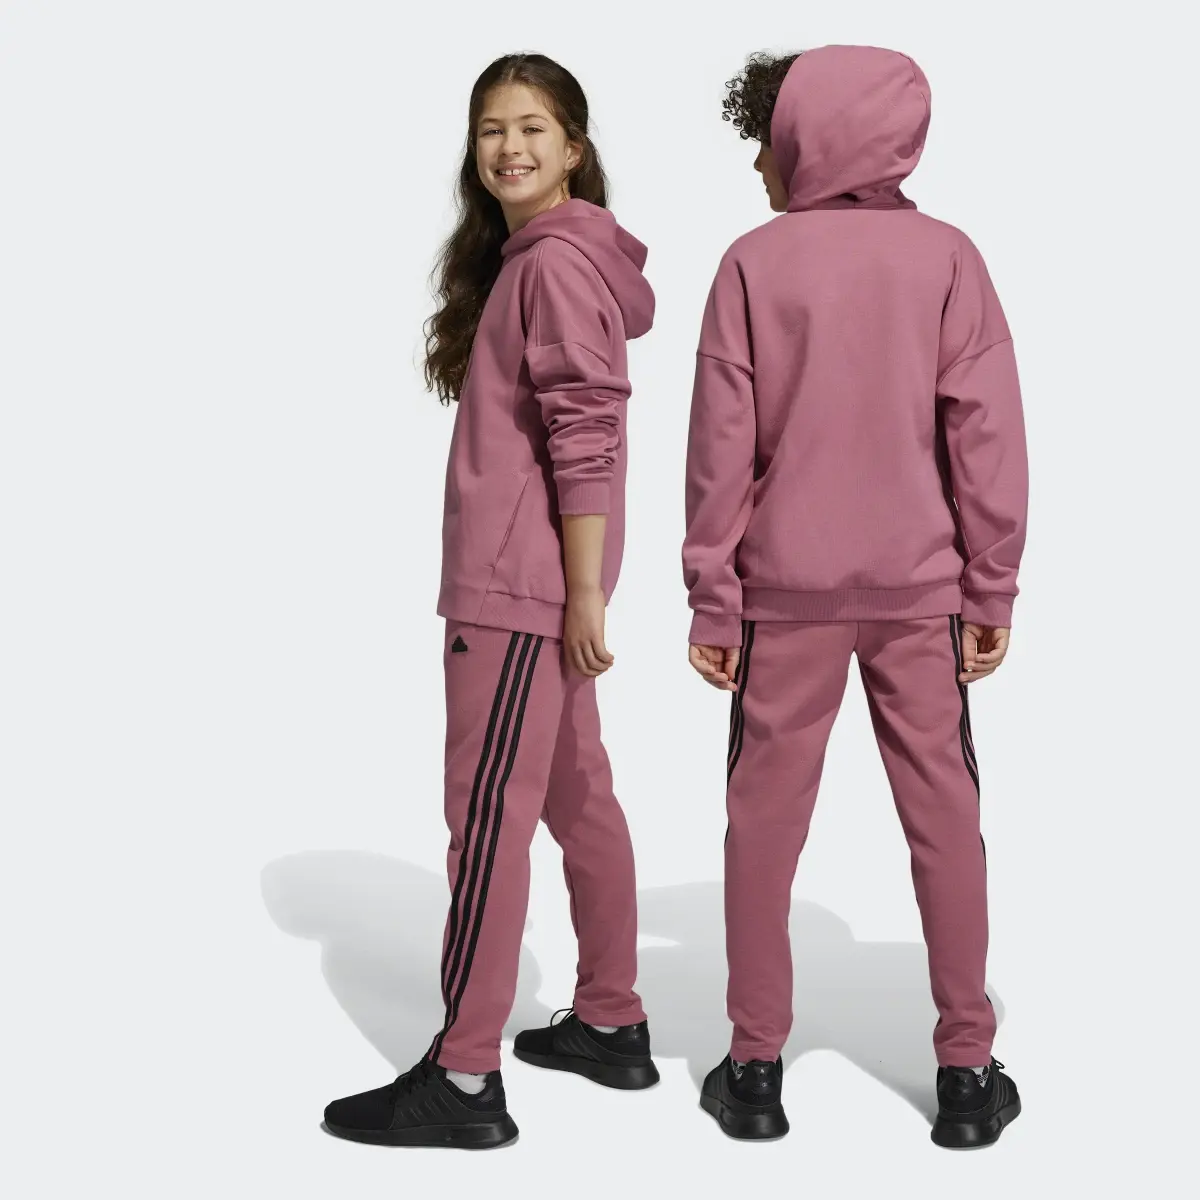 Adidas Future Icons 3-Stripes Ankle-Length Tracksuit Bottoms. 2